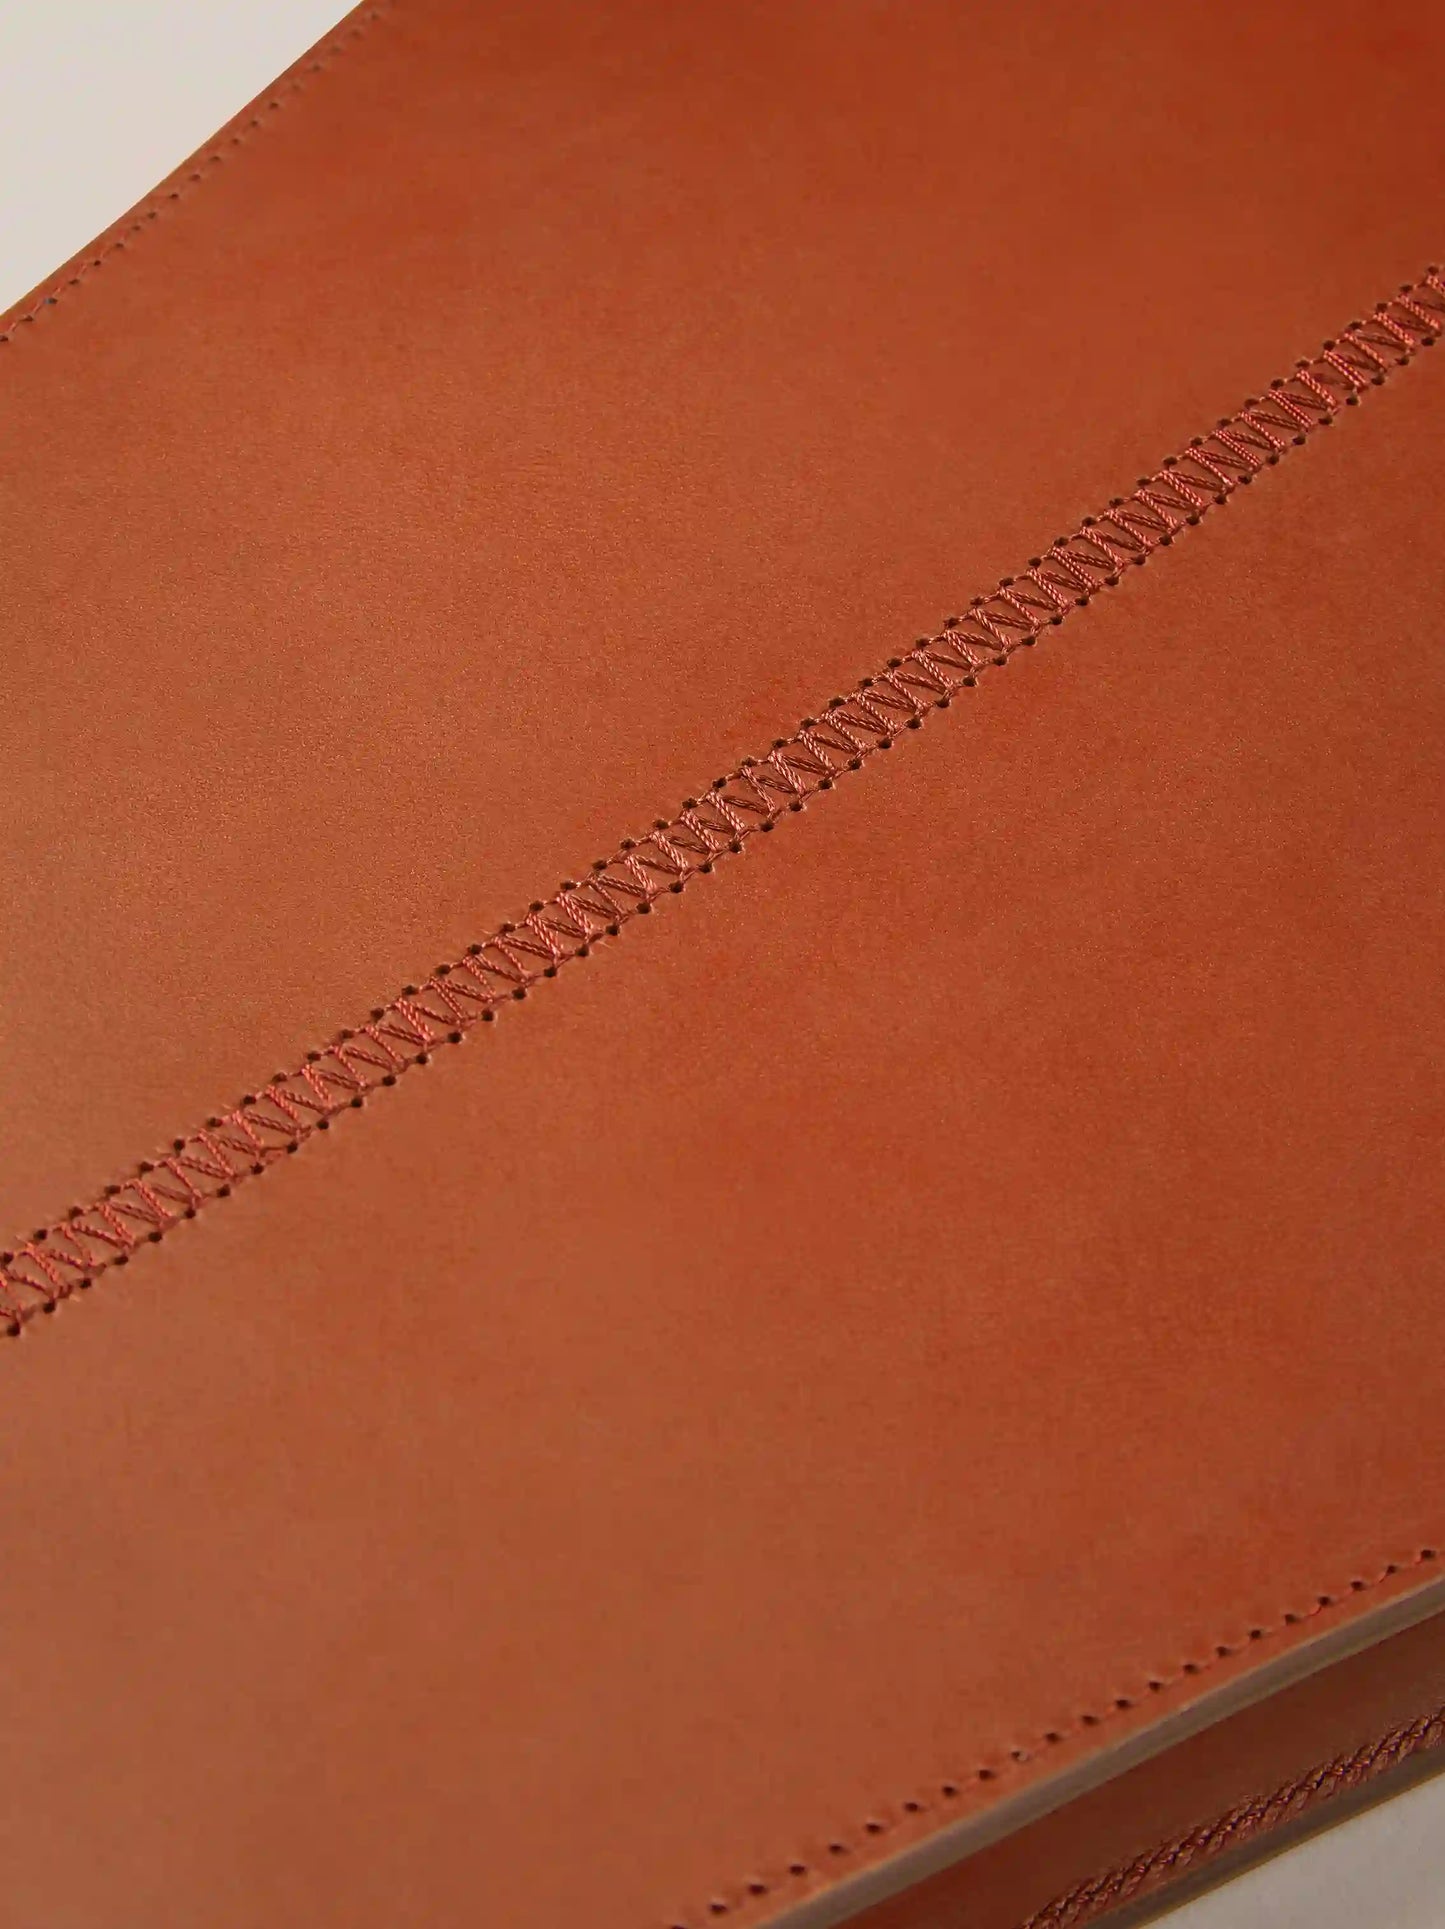 Tan Leather Tennis Racket Cover